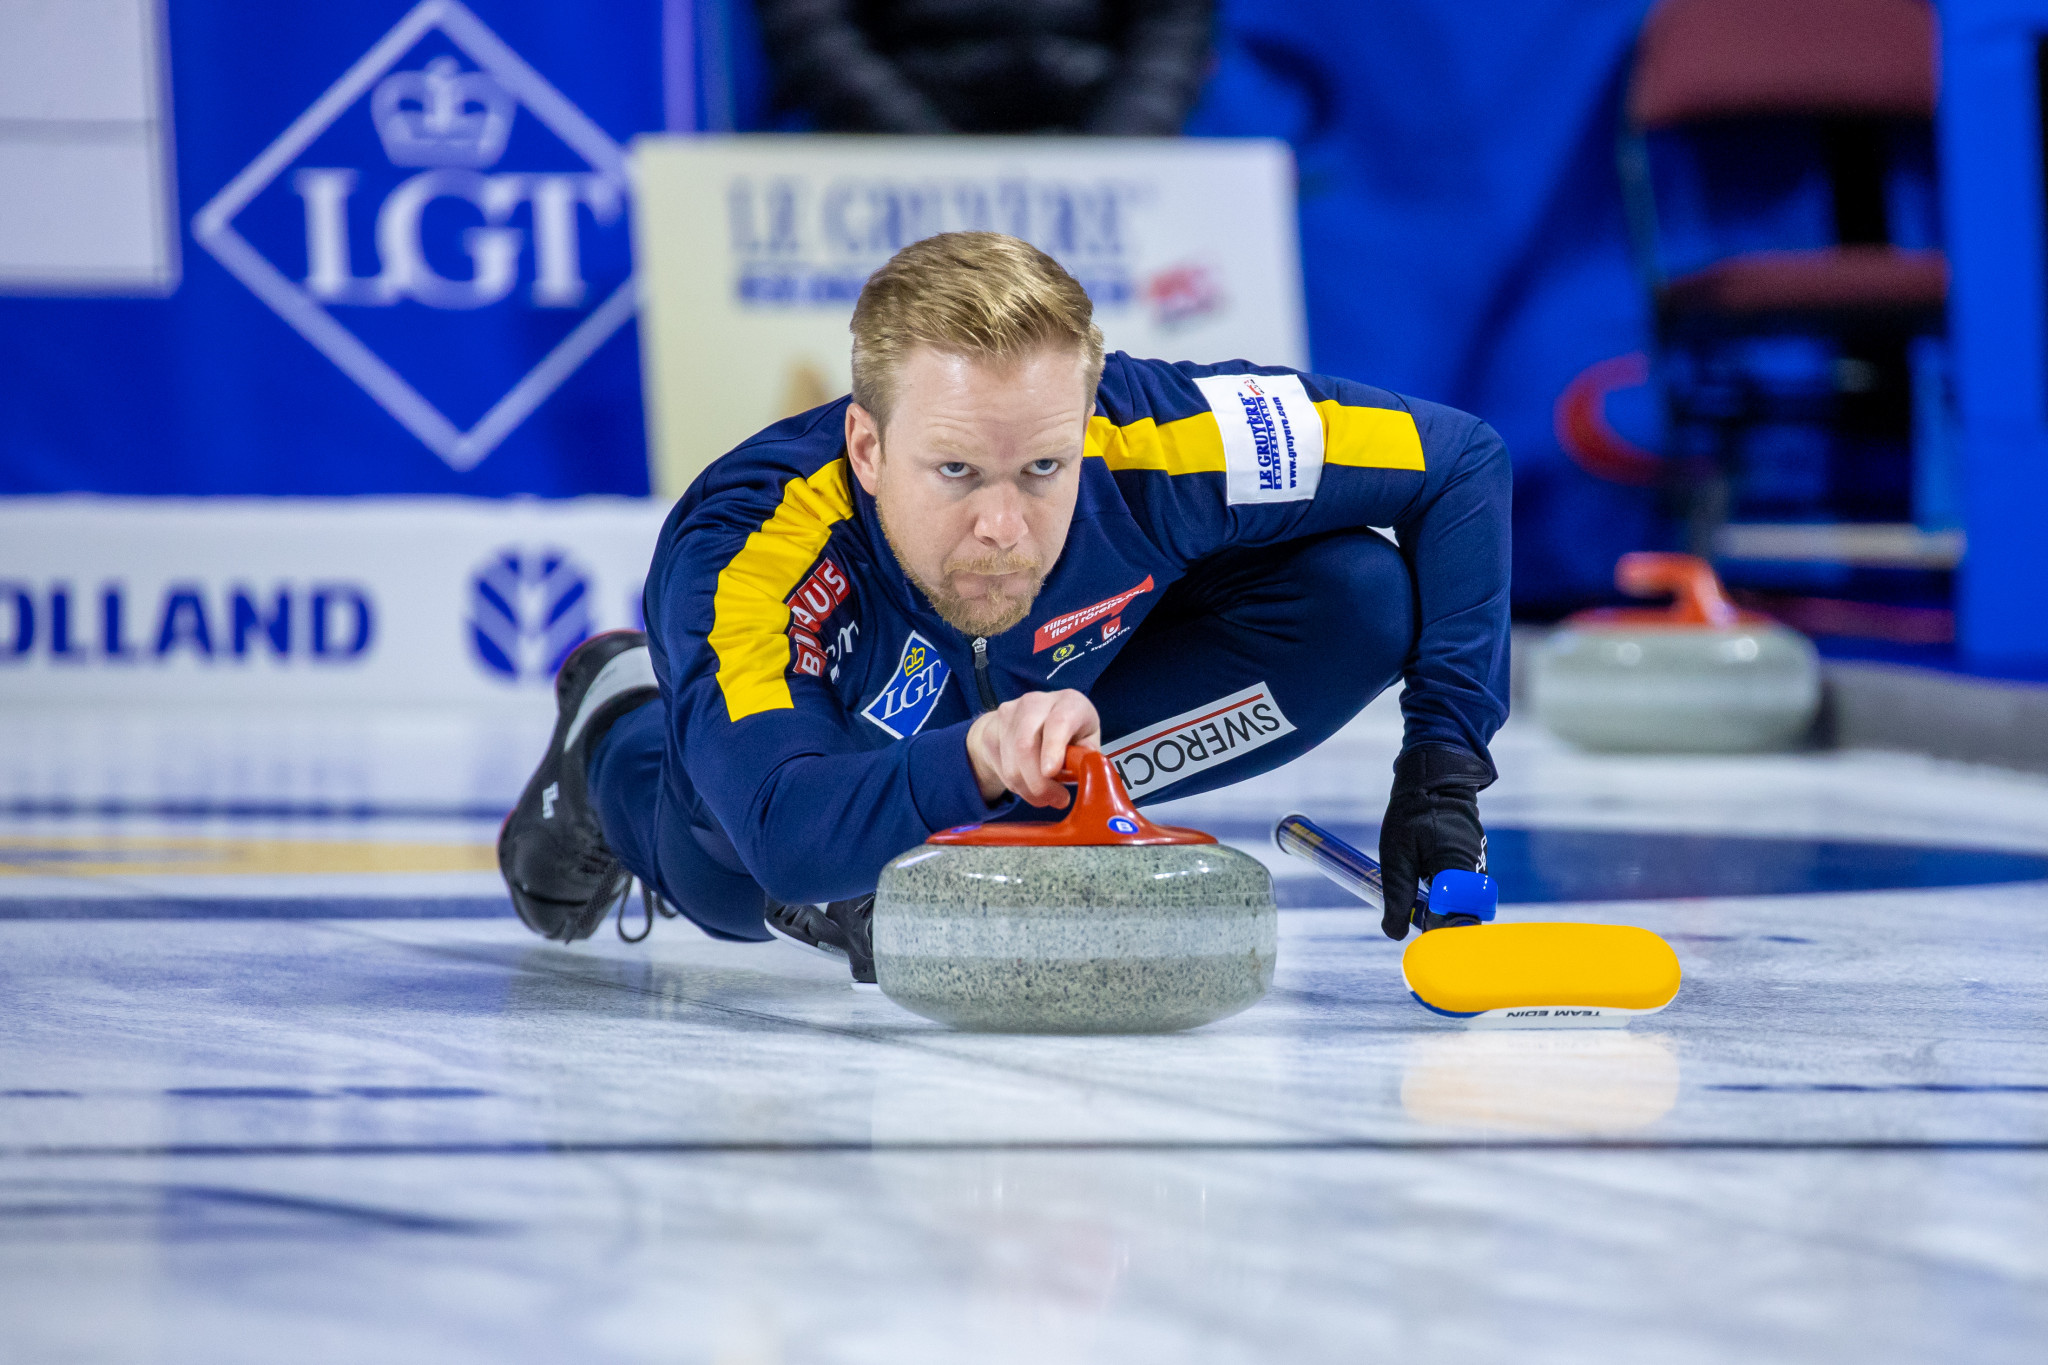 Olympic champions Sweden win on opening day of World Men’s Curling Championship